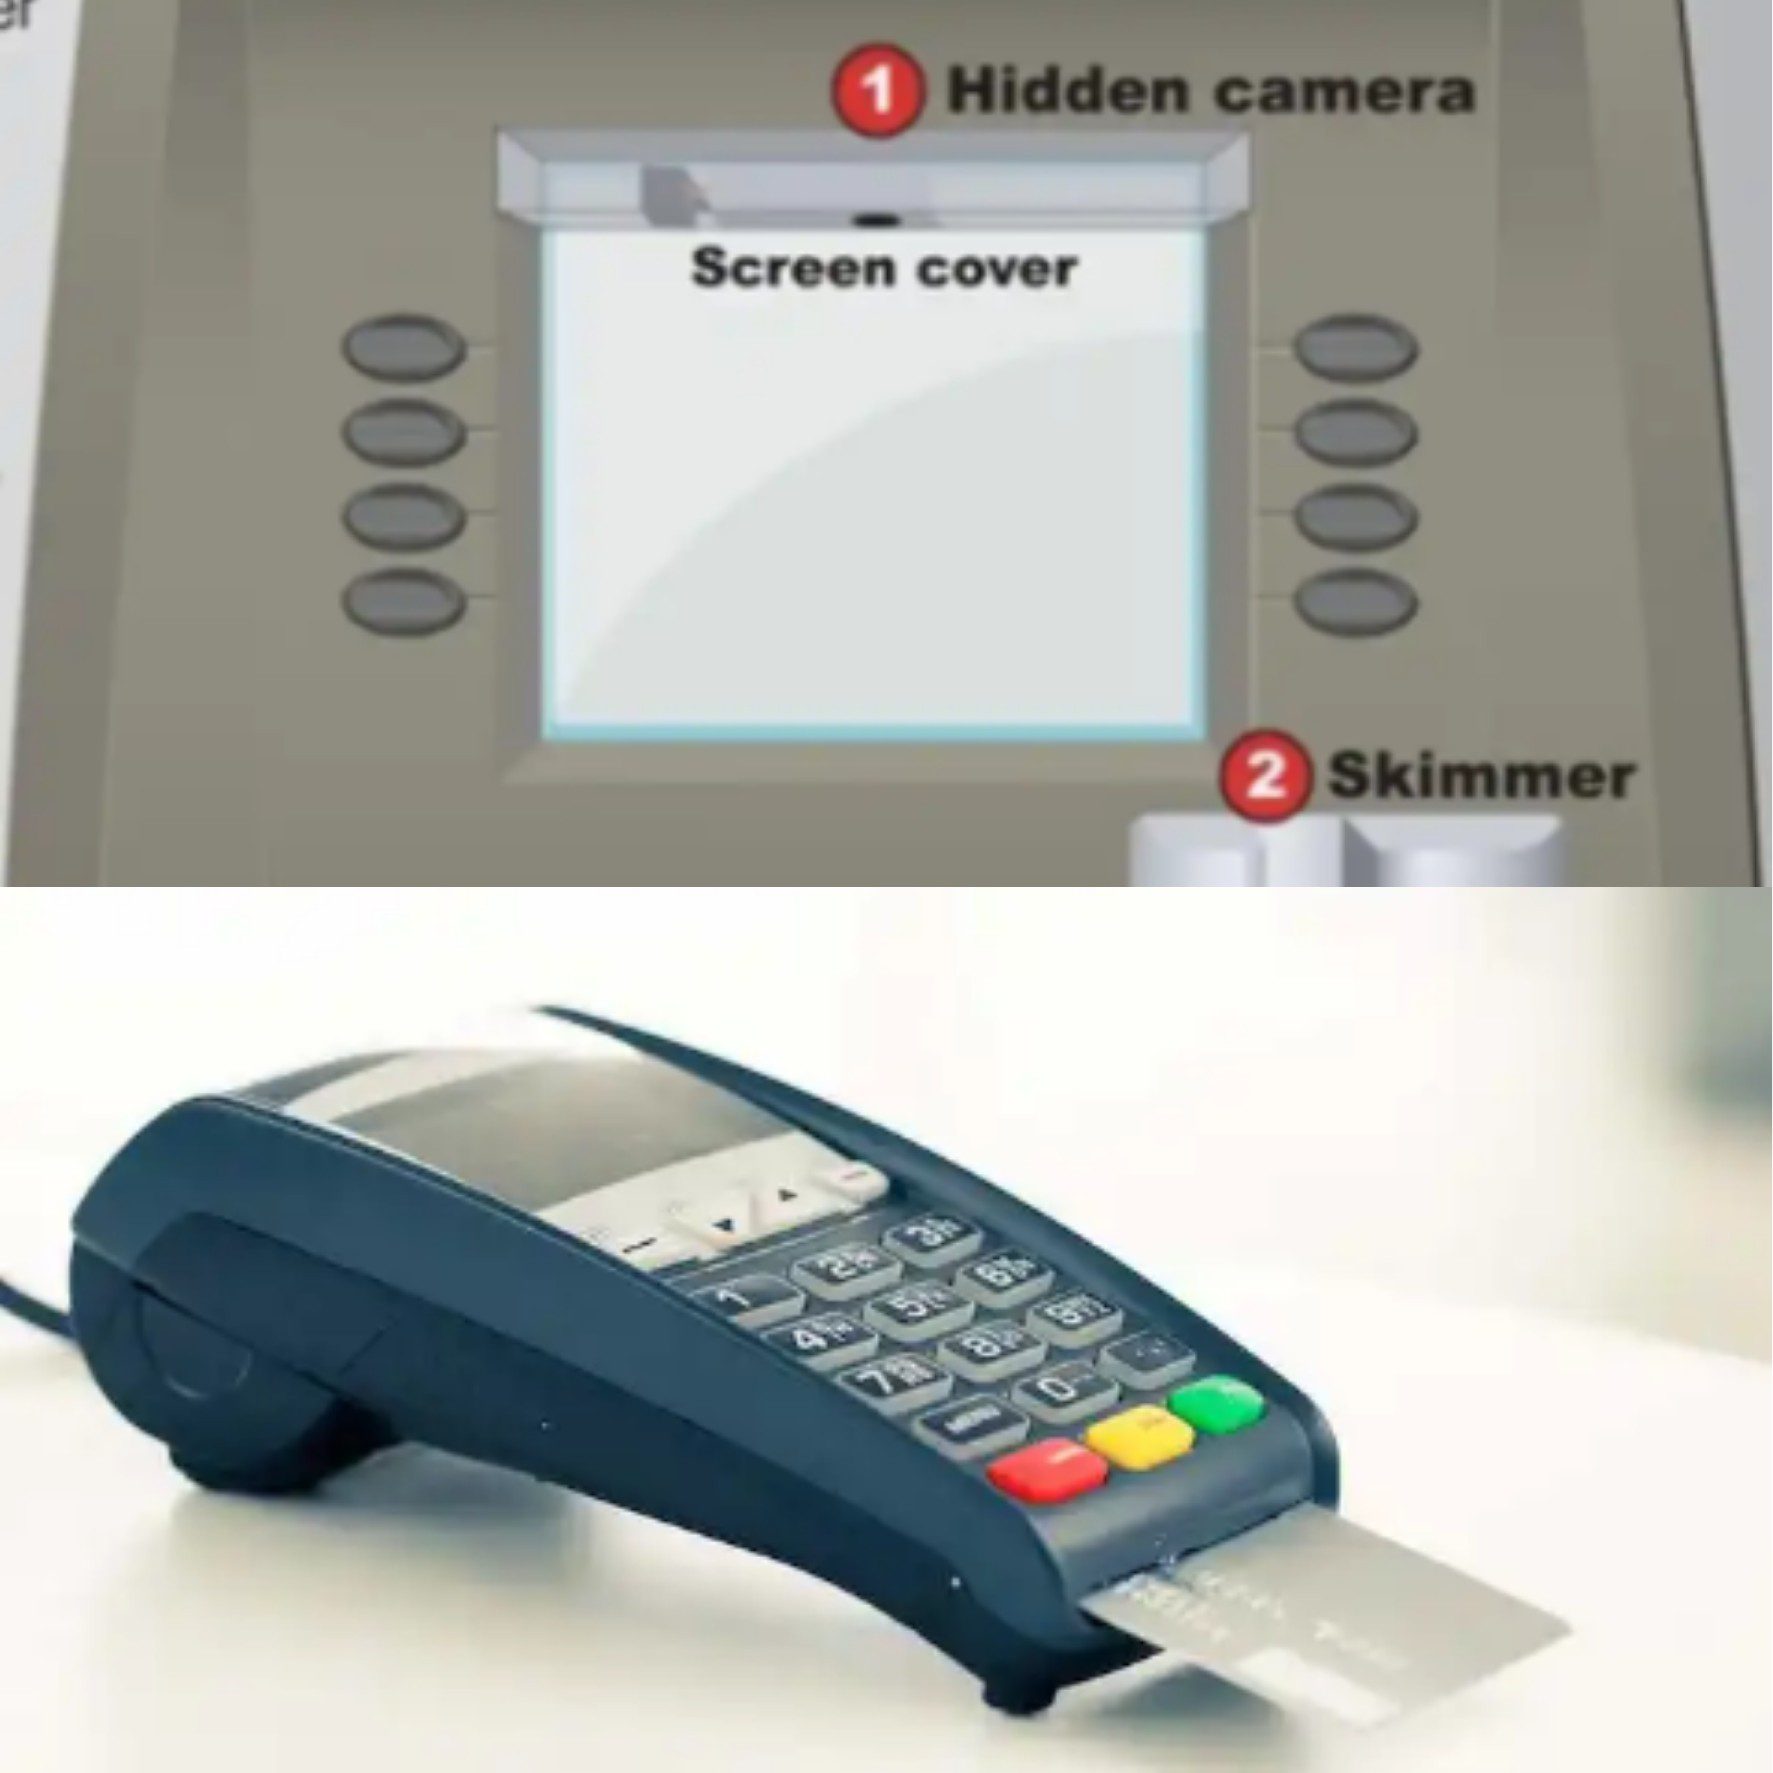 How to protect yourself against ATM, POS skimming fraud